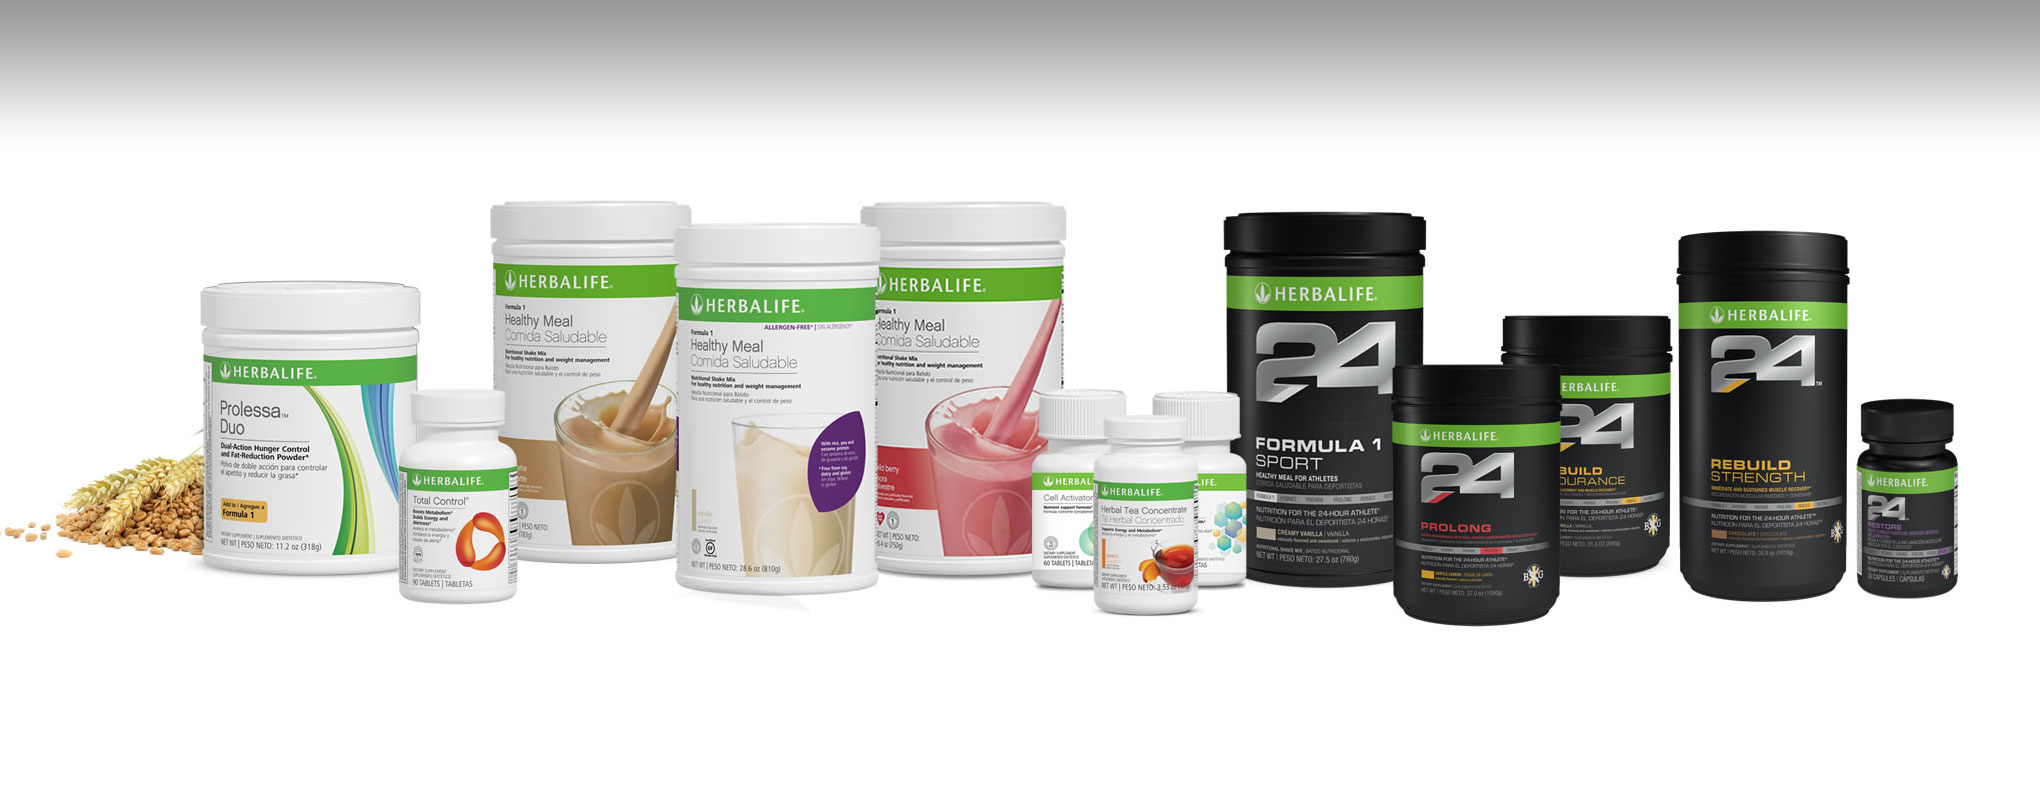 How Much is Herbalife?